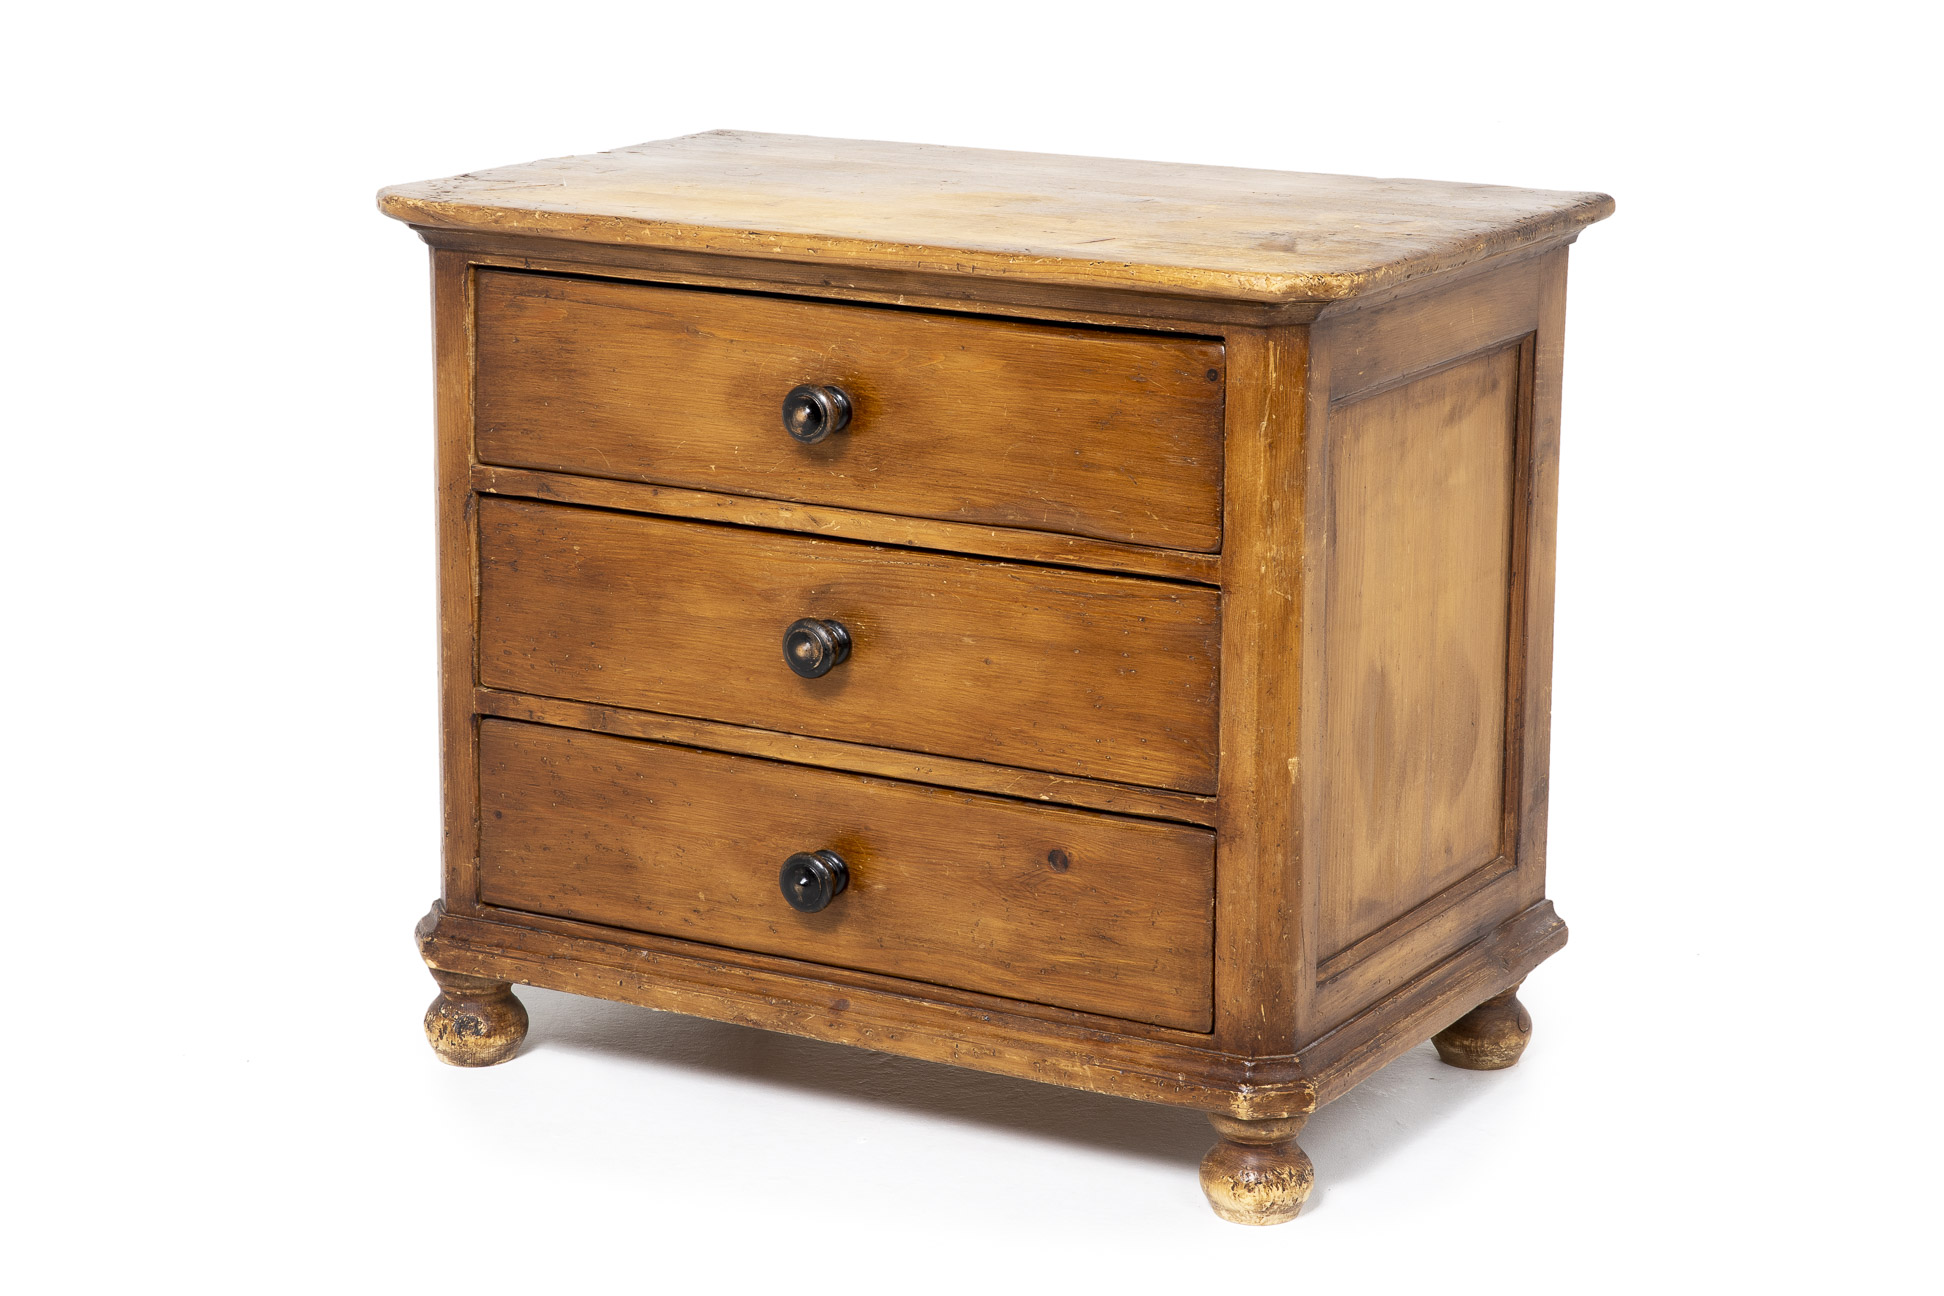 A SMALL ANTIQUE CHEST OF DRAWERS